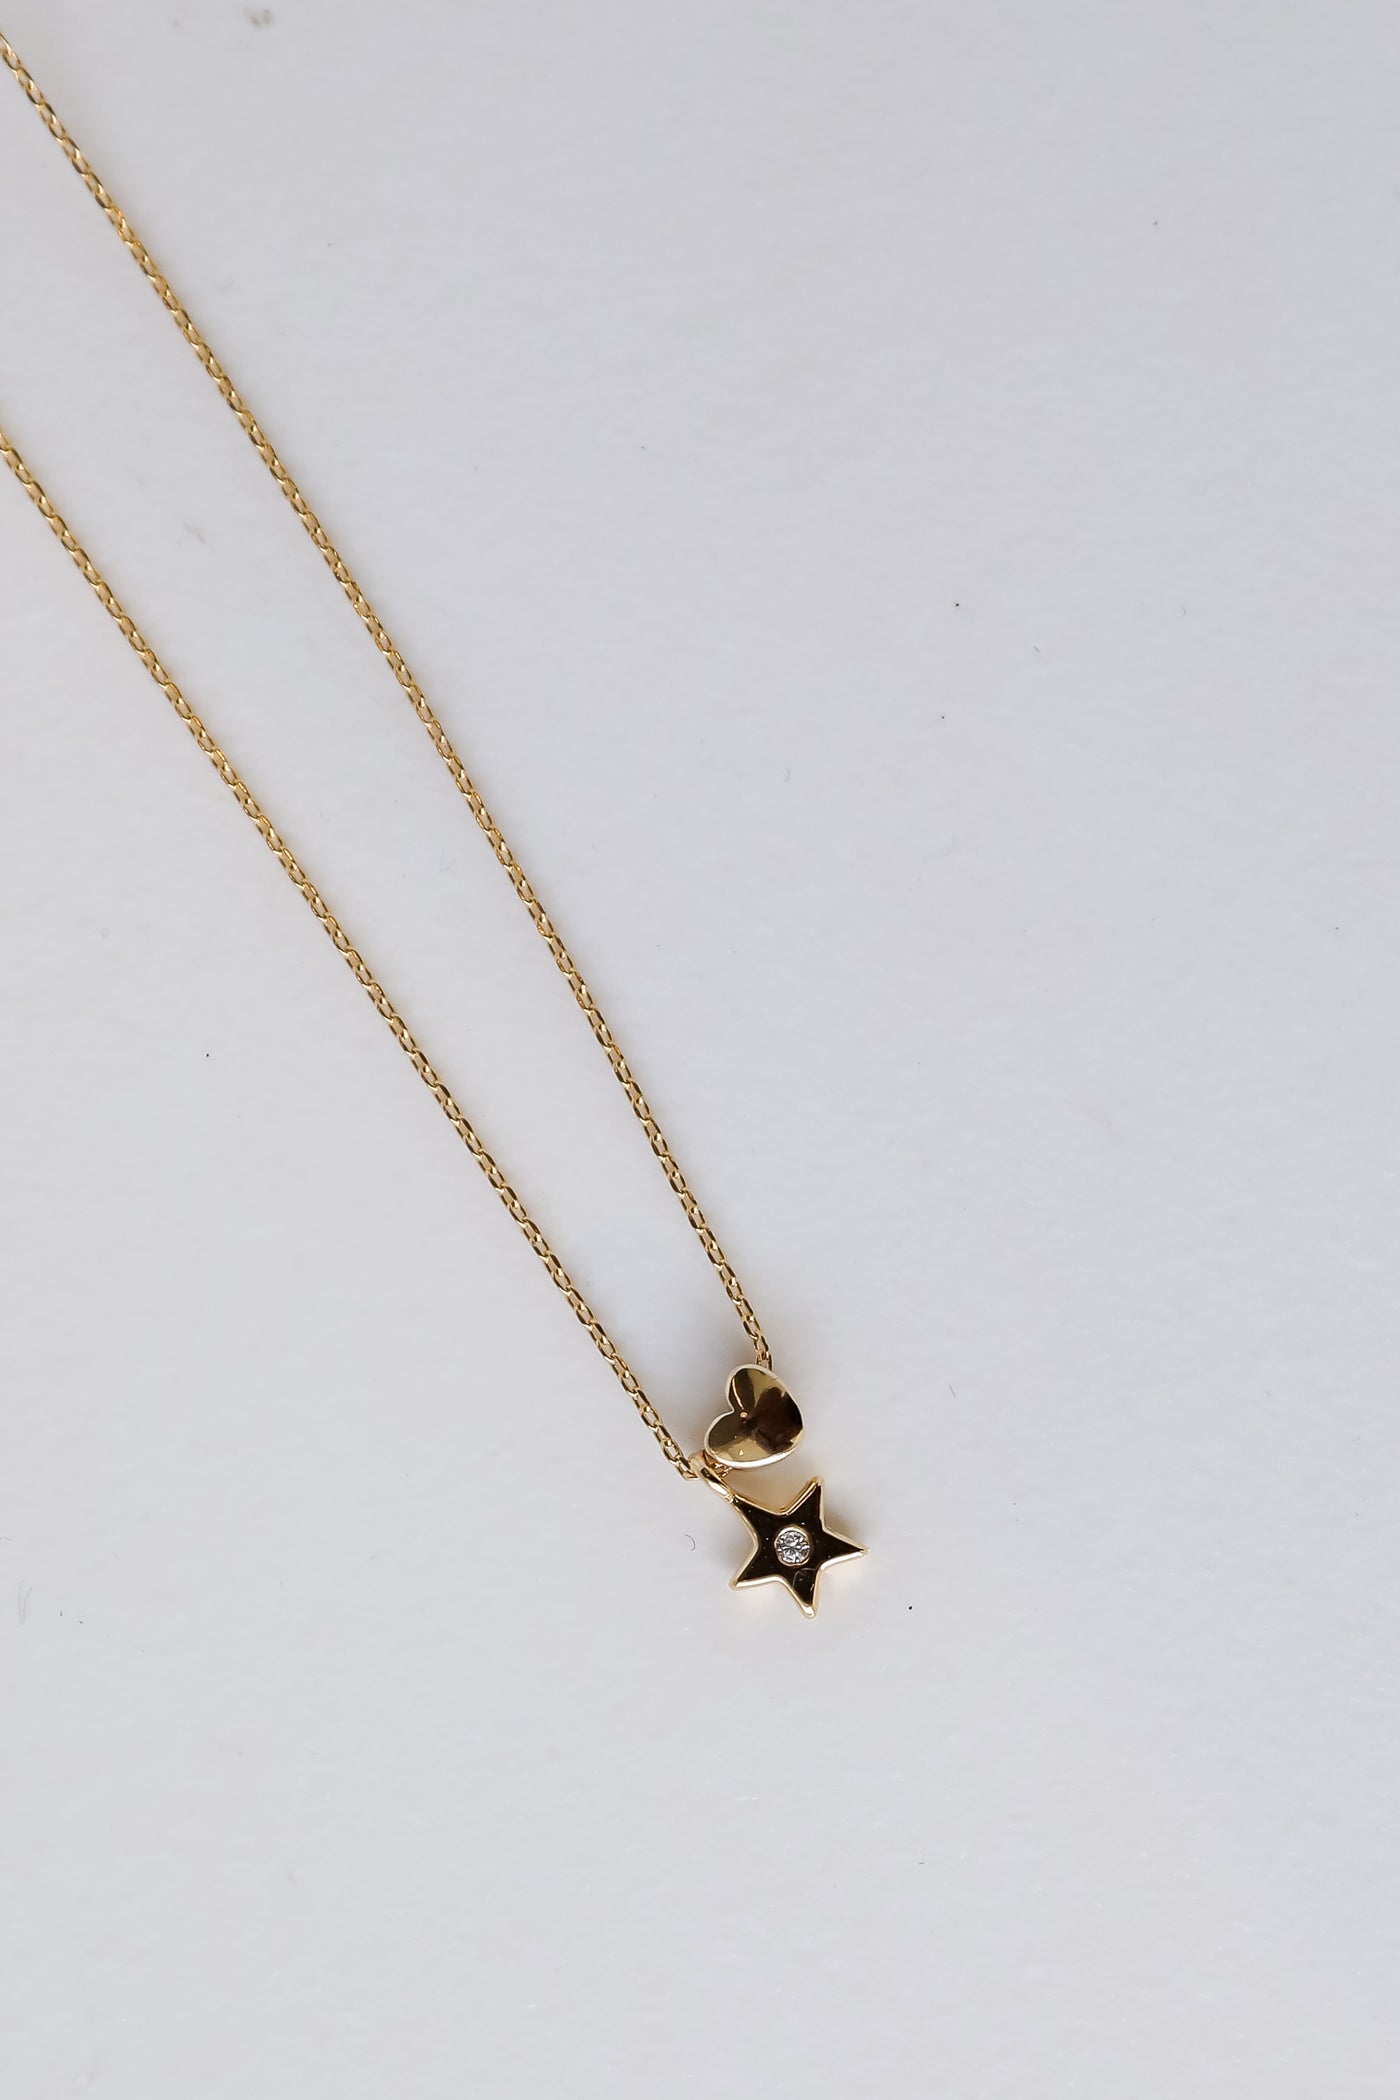 Gold Star + Heart Charm Necklace flat lay